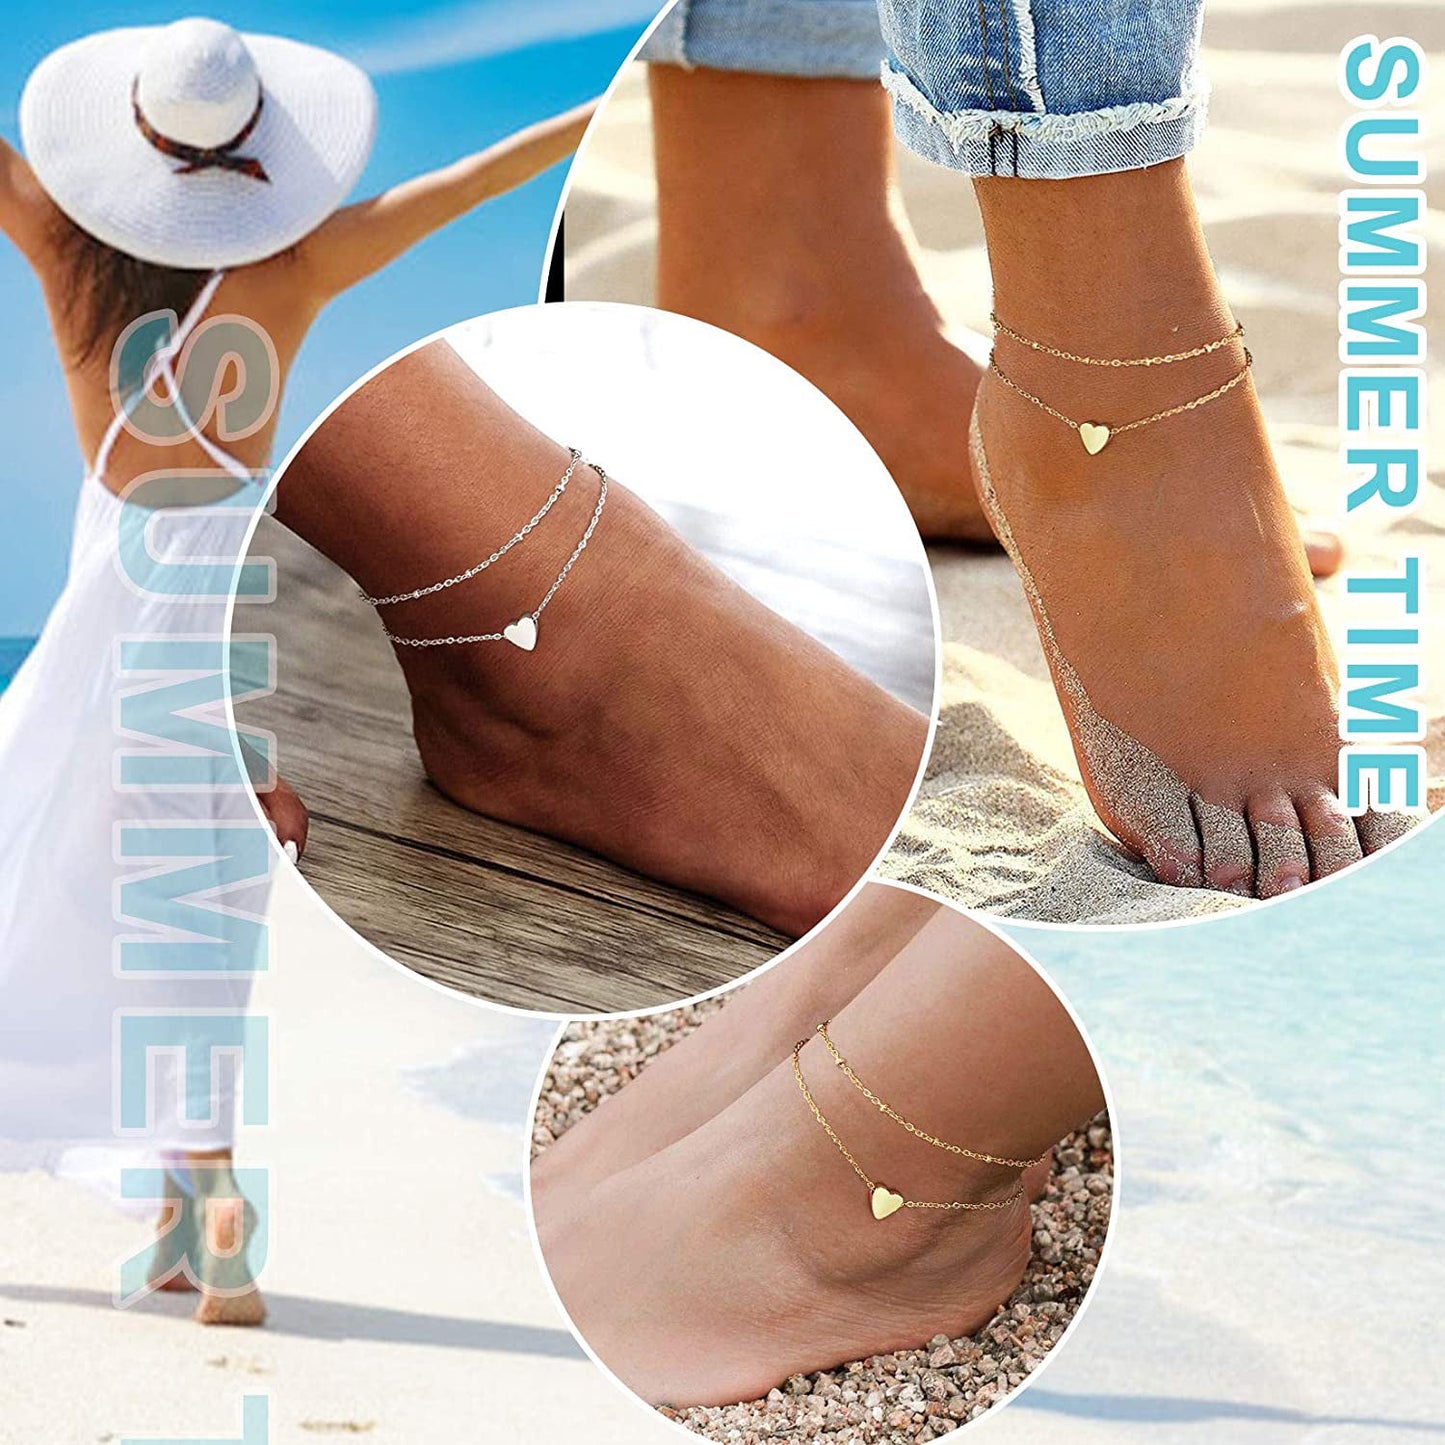 ChainsPro Ankle Bracelets for Women Layered Heart Charm Anklets Foot Chain Summer Boho Beach Gift